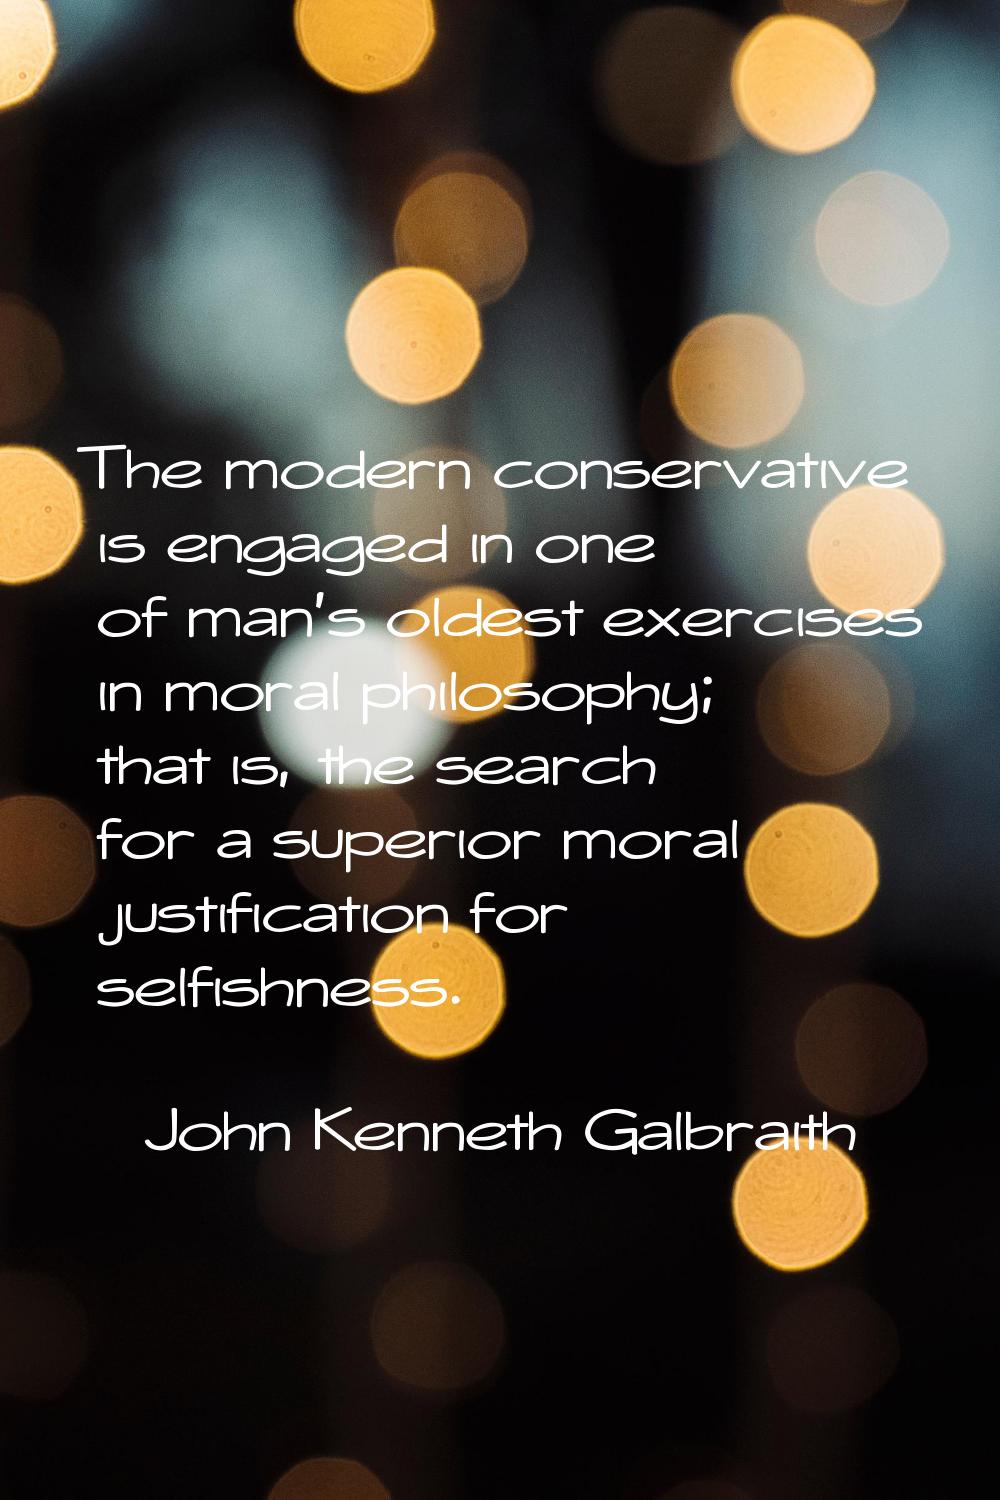 The modern conservative is engaged in one of man's oldest exercises in moral philosophy; that is, t